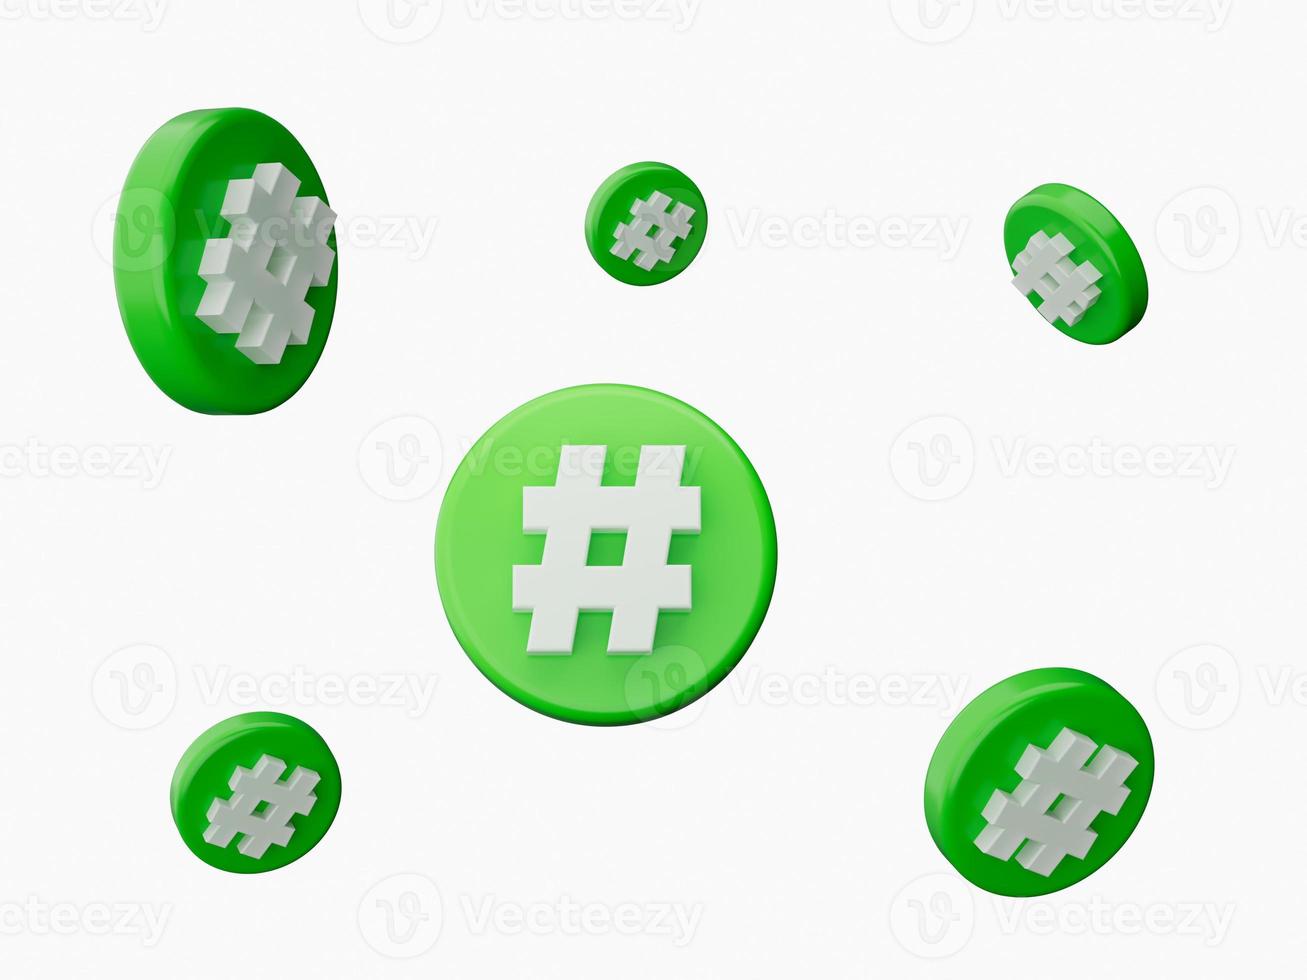 3D hashtag search link symbol on social media notification icon isolated on white background 3d illustration photo